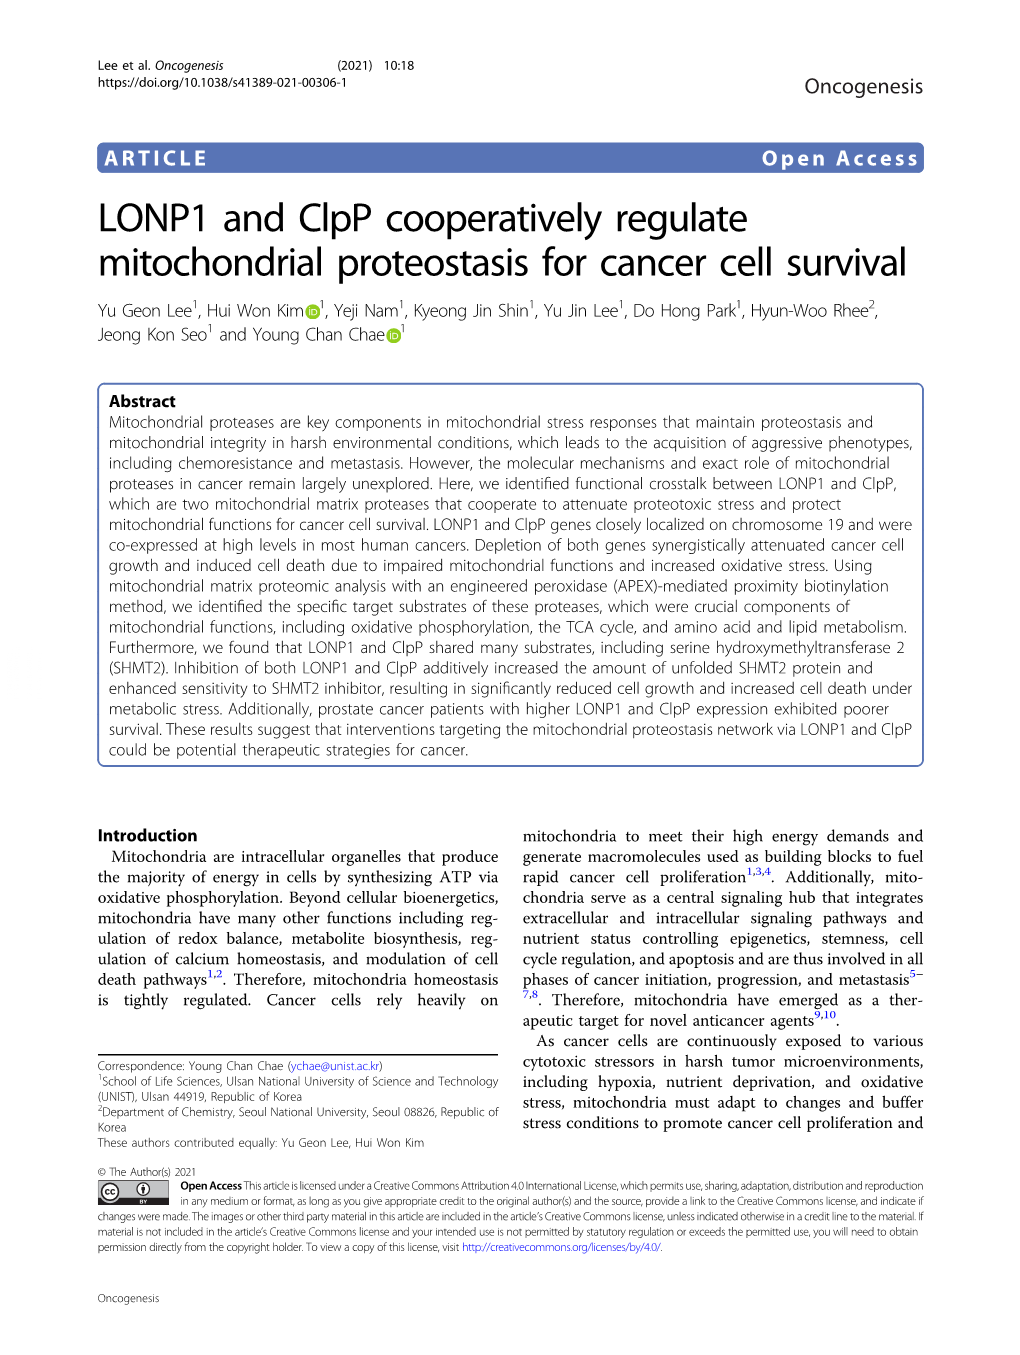 LONP1 and Clpp Cooperatively Regulate Mitochondrial Proteostasis for Cancer Cell Survival